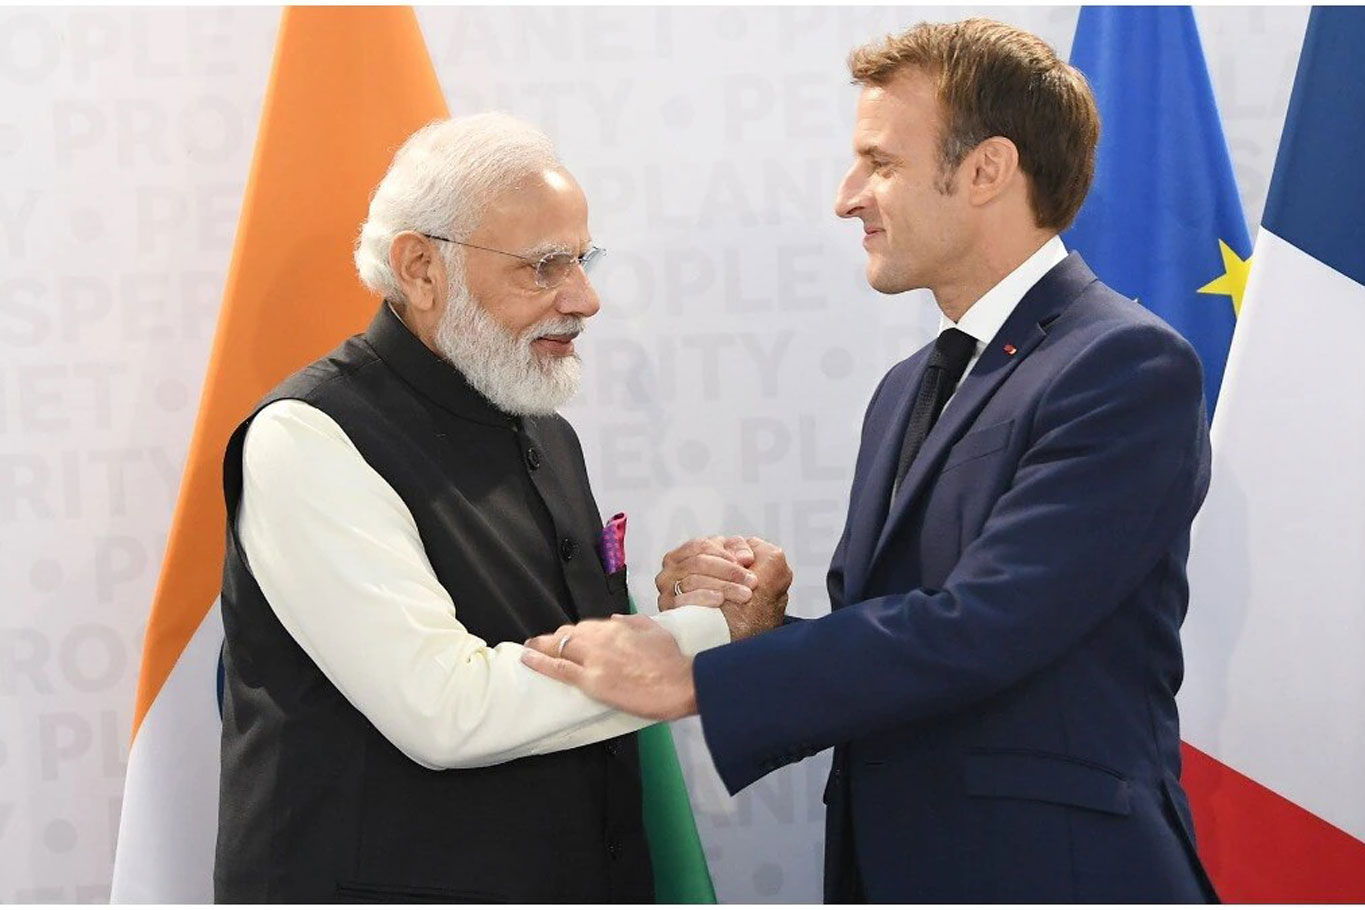 PM Modi in Paris to Strengthen Strategic Ties with France